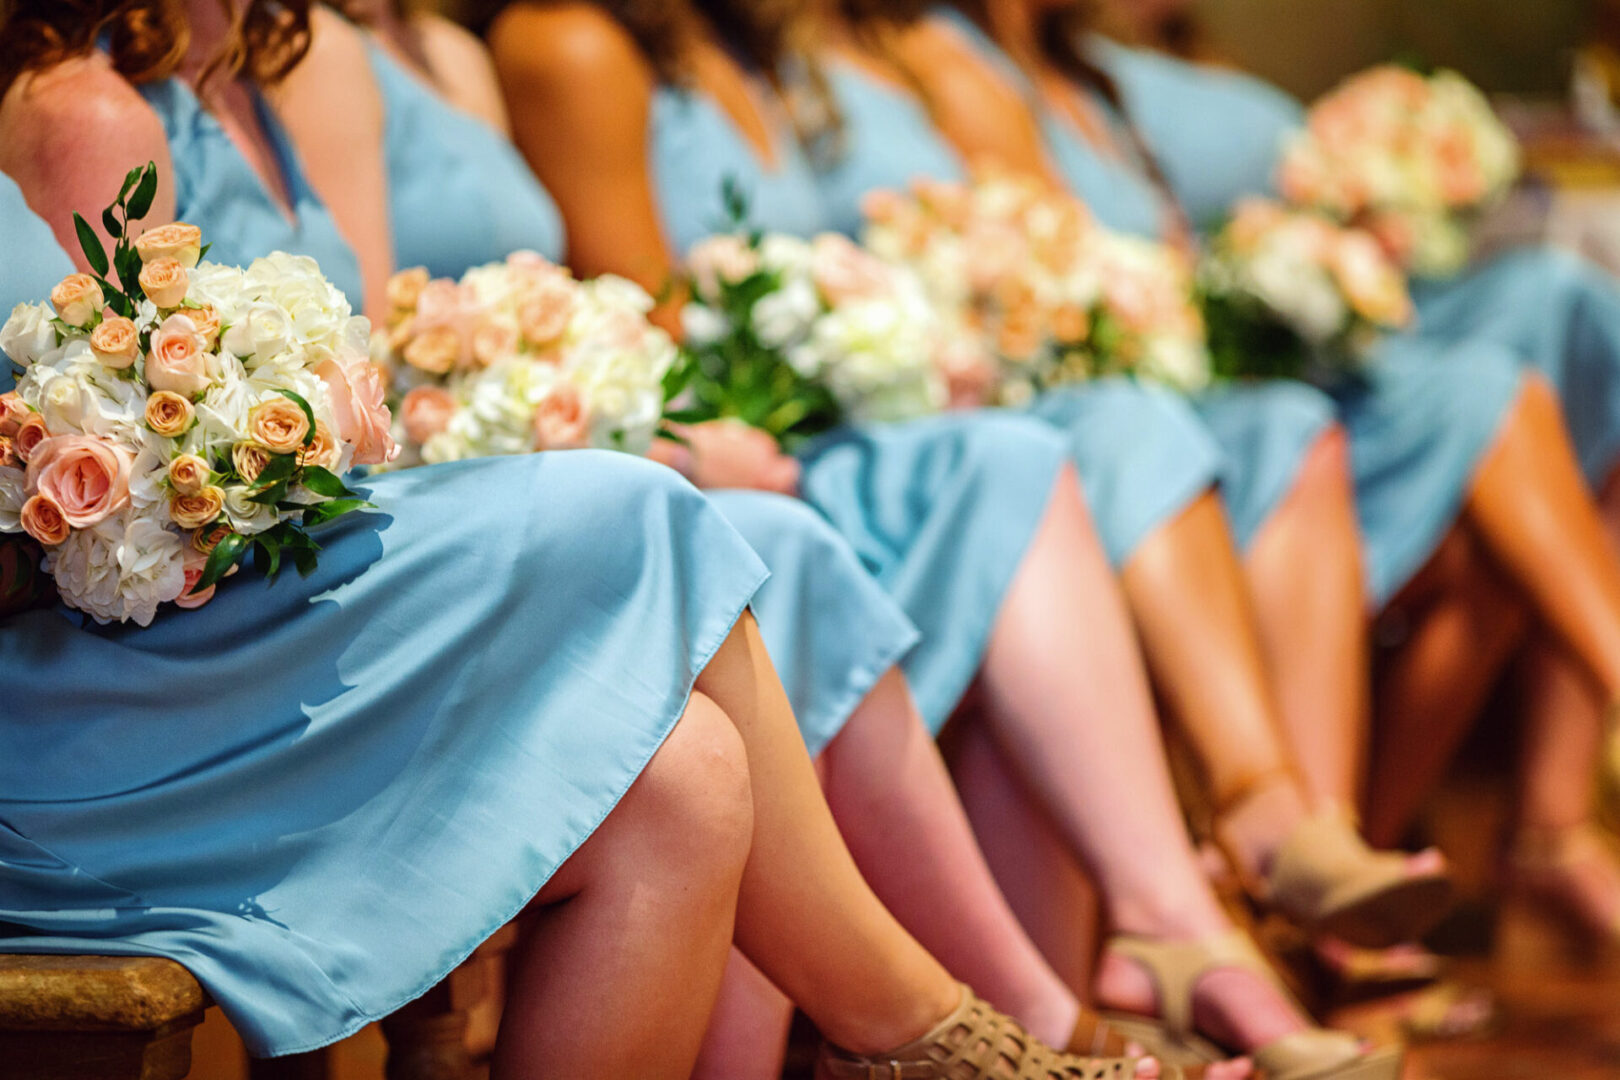 Legs image of so many ladies holding flower bunches